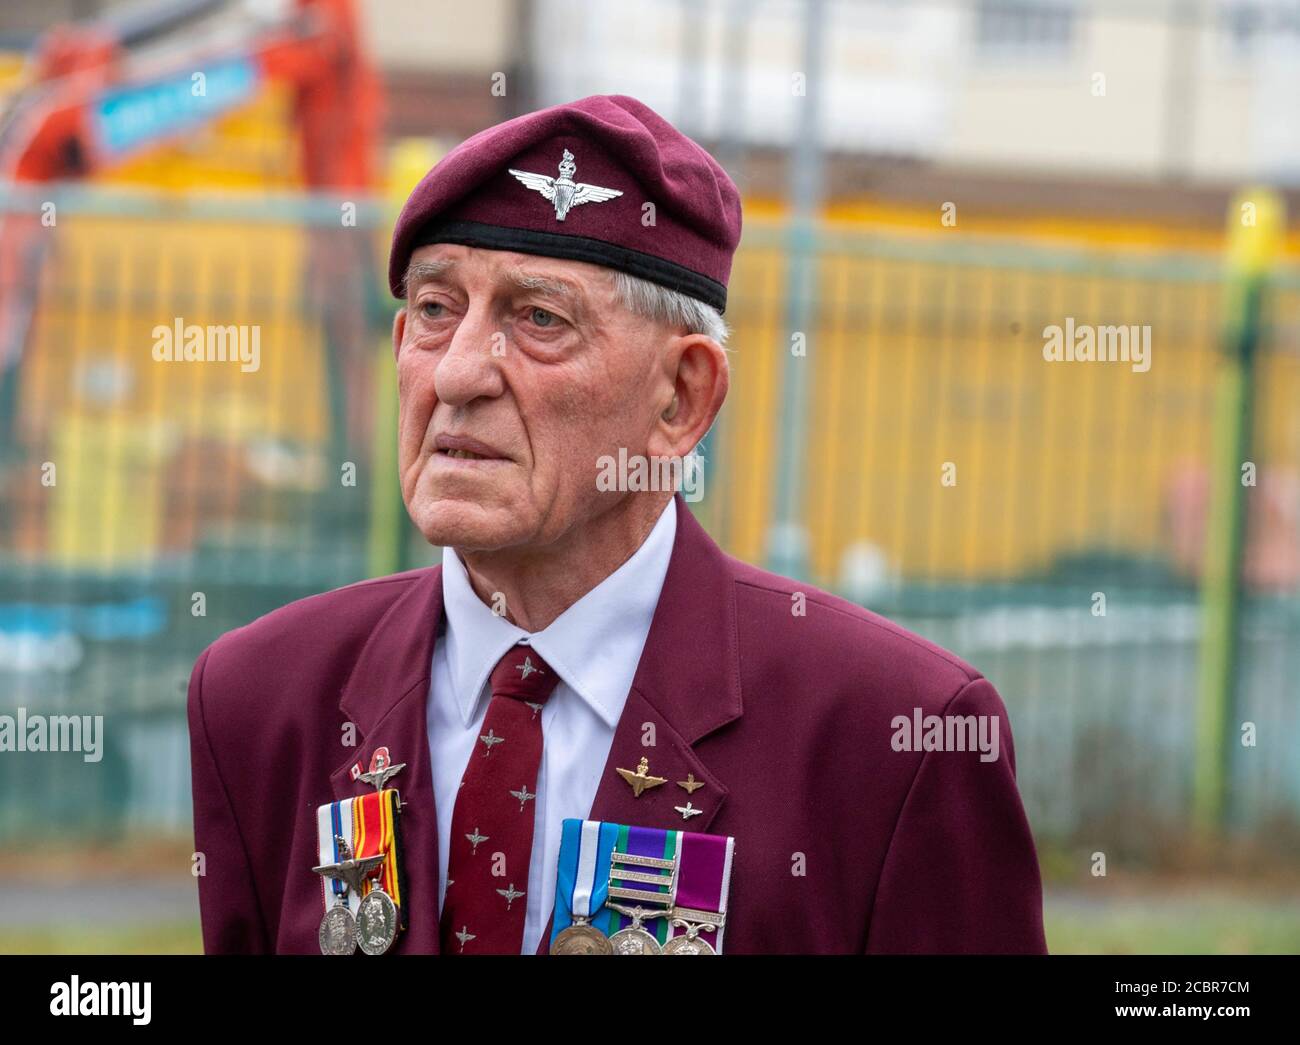 Brentwood Essex 15th August 2020 A solitary Parachute Regiment veteran, Mr. John Pinkerton, carried out a solo act of rememberance at 11am on VJ Day at the War memorial, Brentwood Essex. Credit: Ian Davidson/Alamy Live News Stock Photo